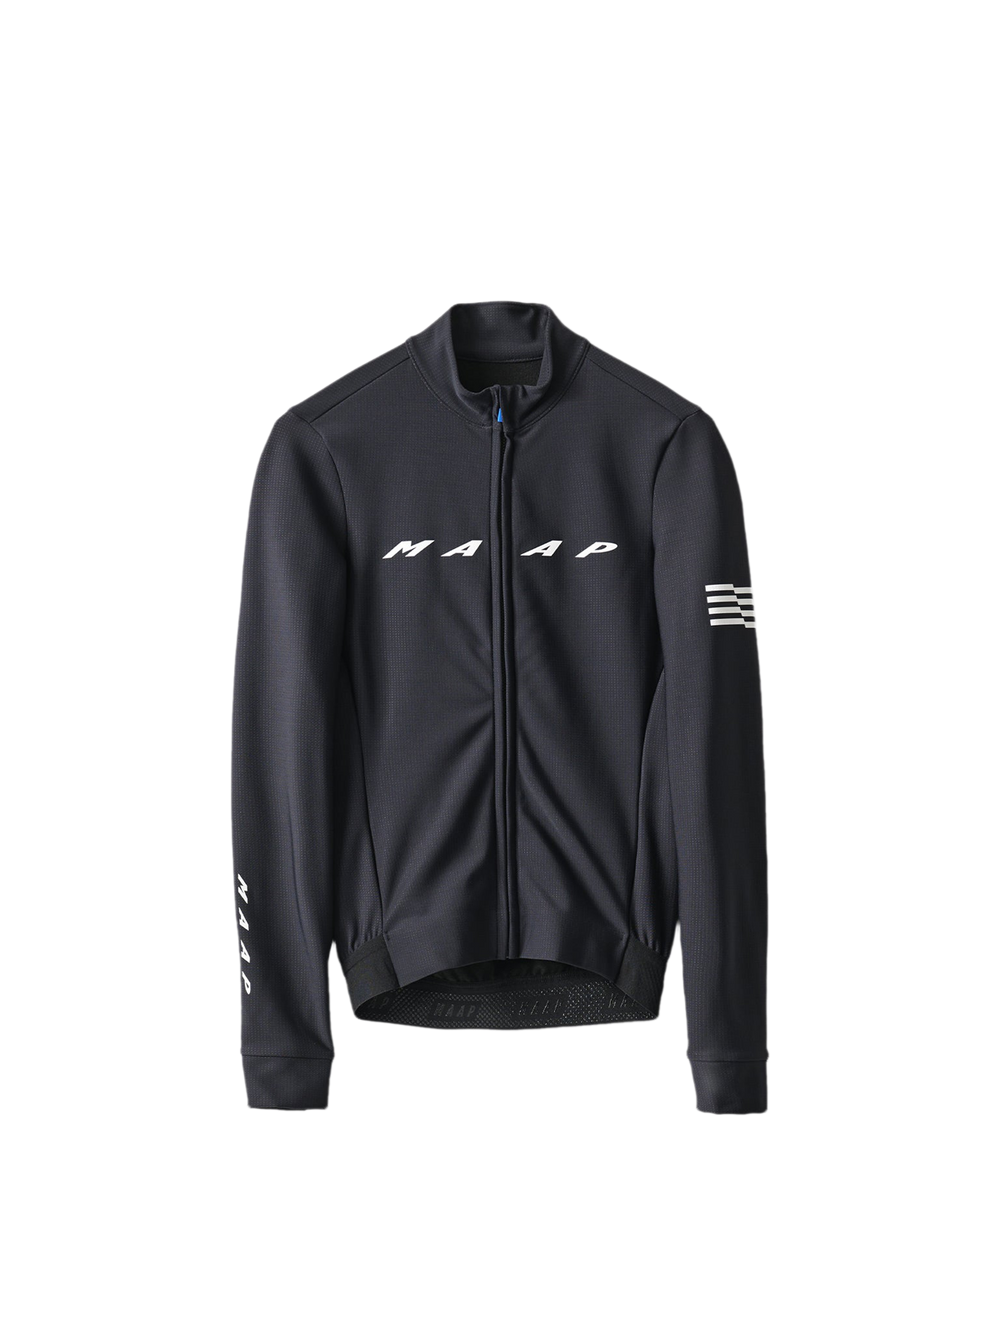 Product Image for Women's Evade Thermal LS Jersey 2.0